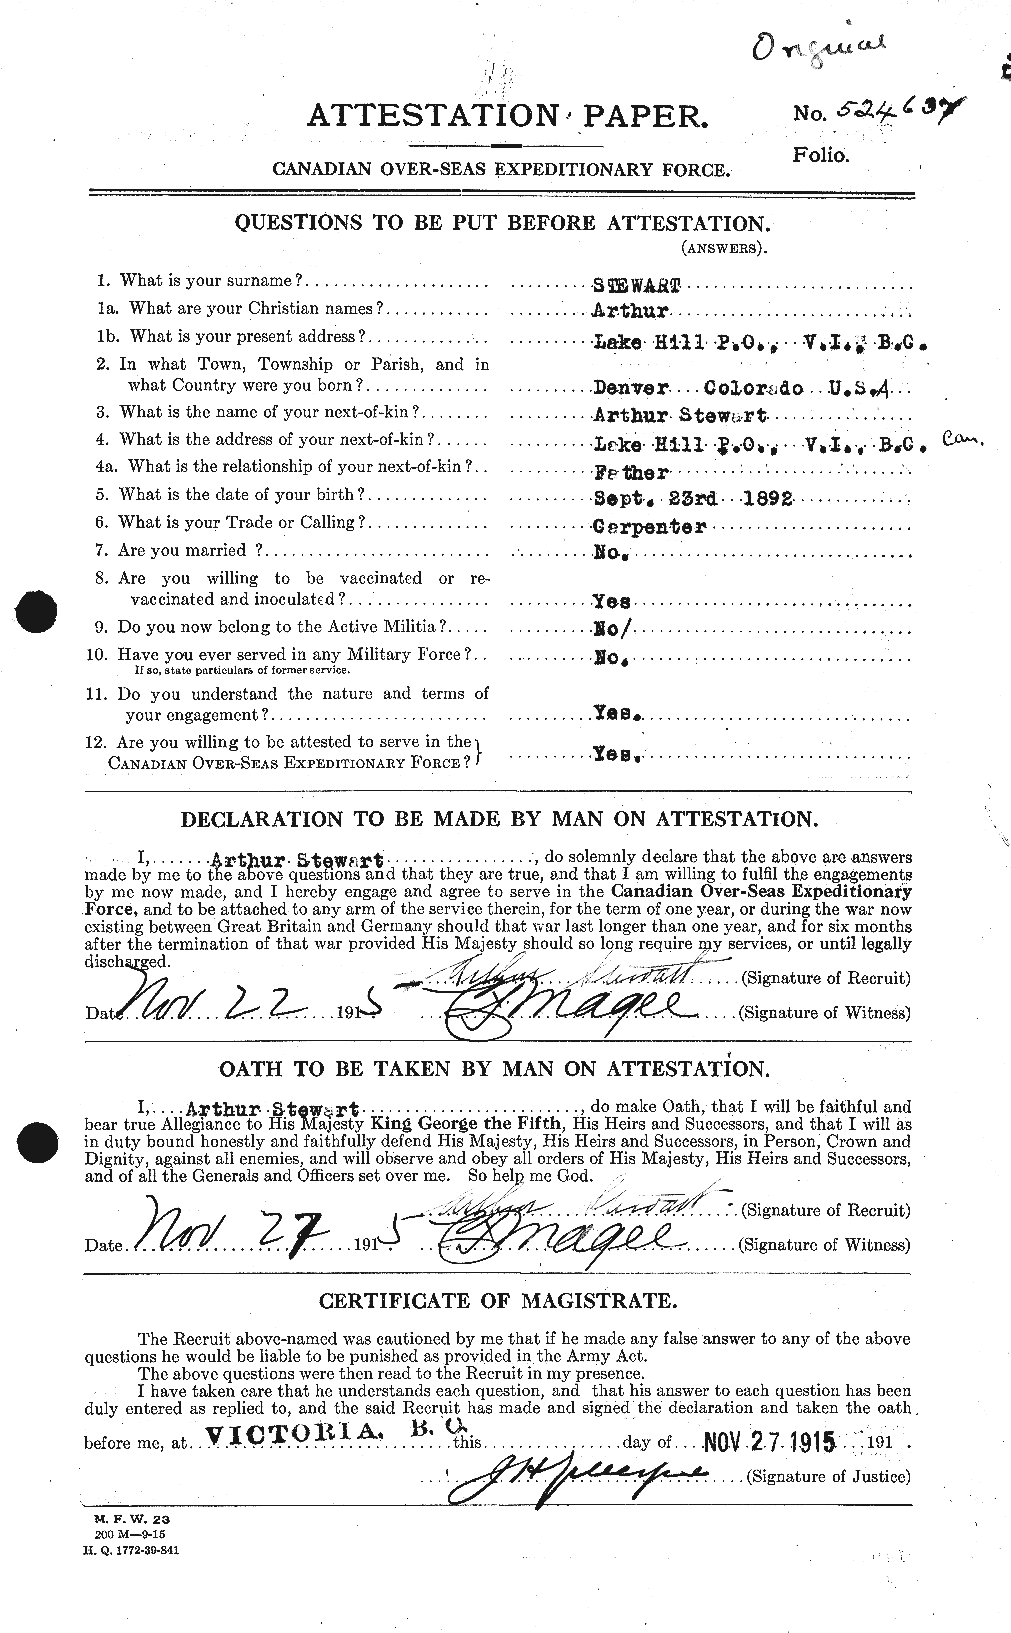 Personnel Records of the First World War - CEF 118478a